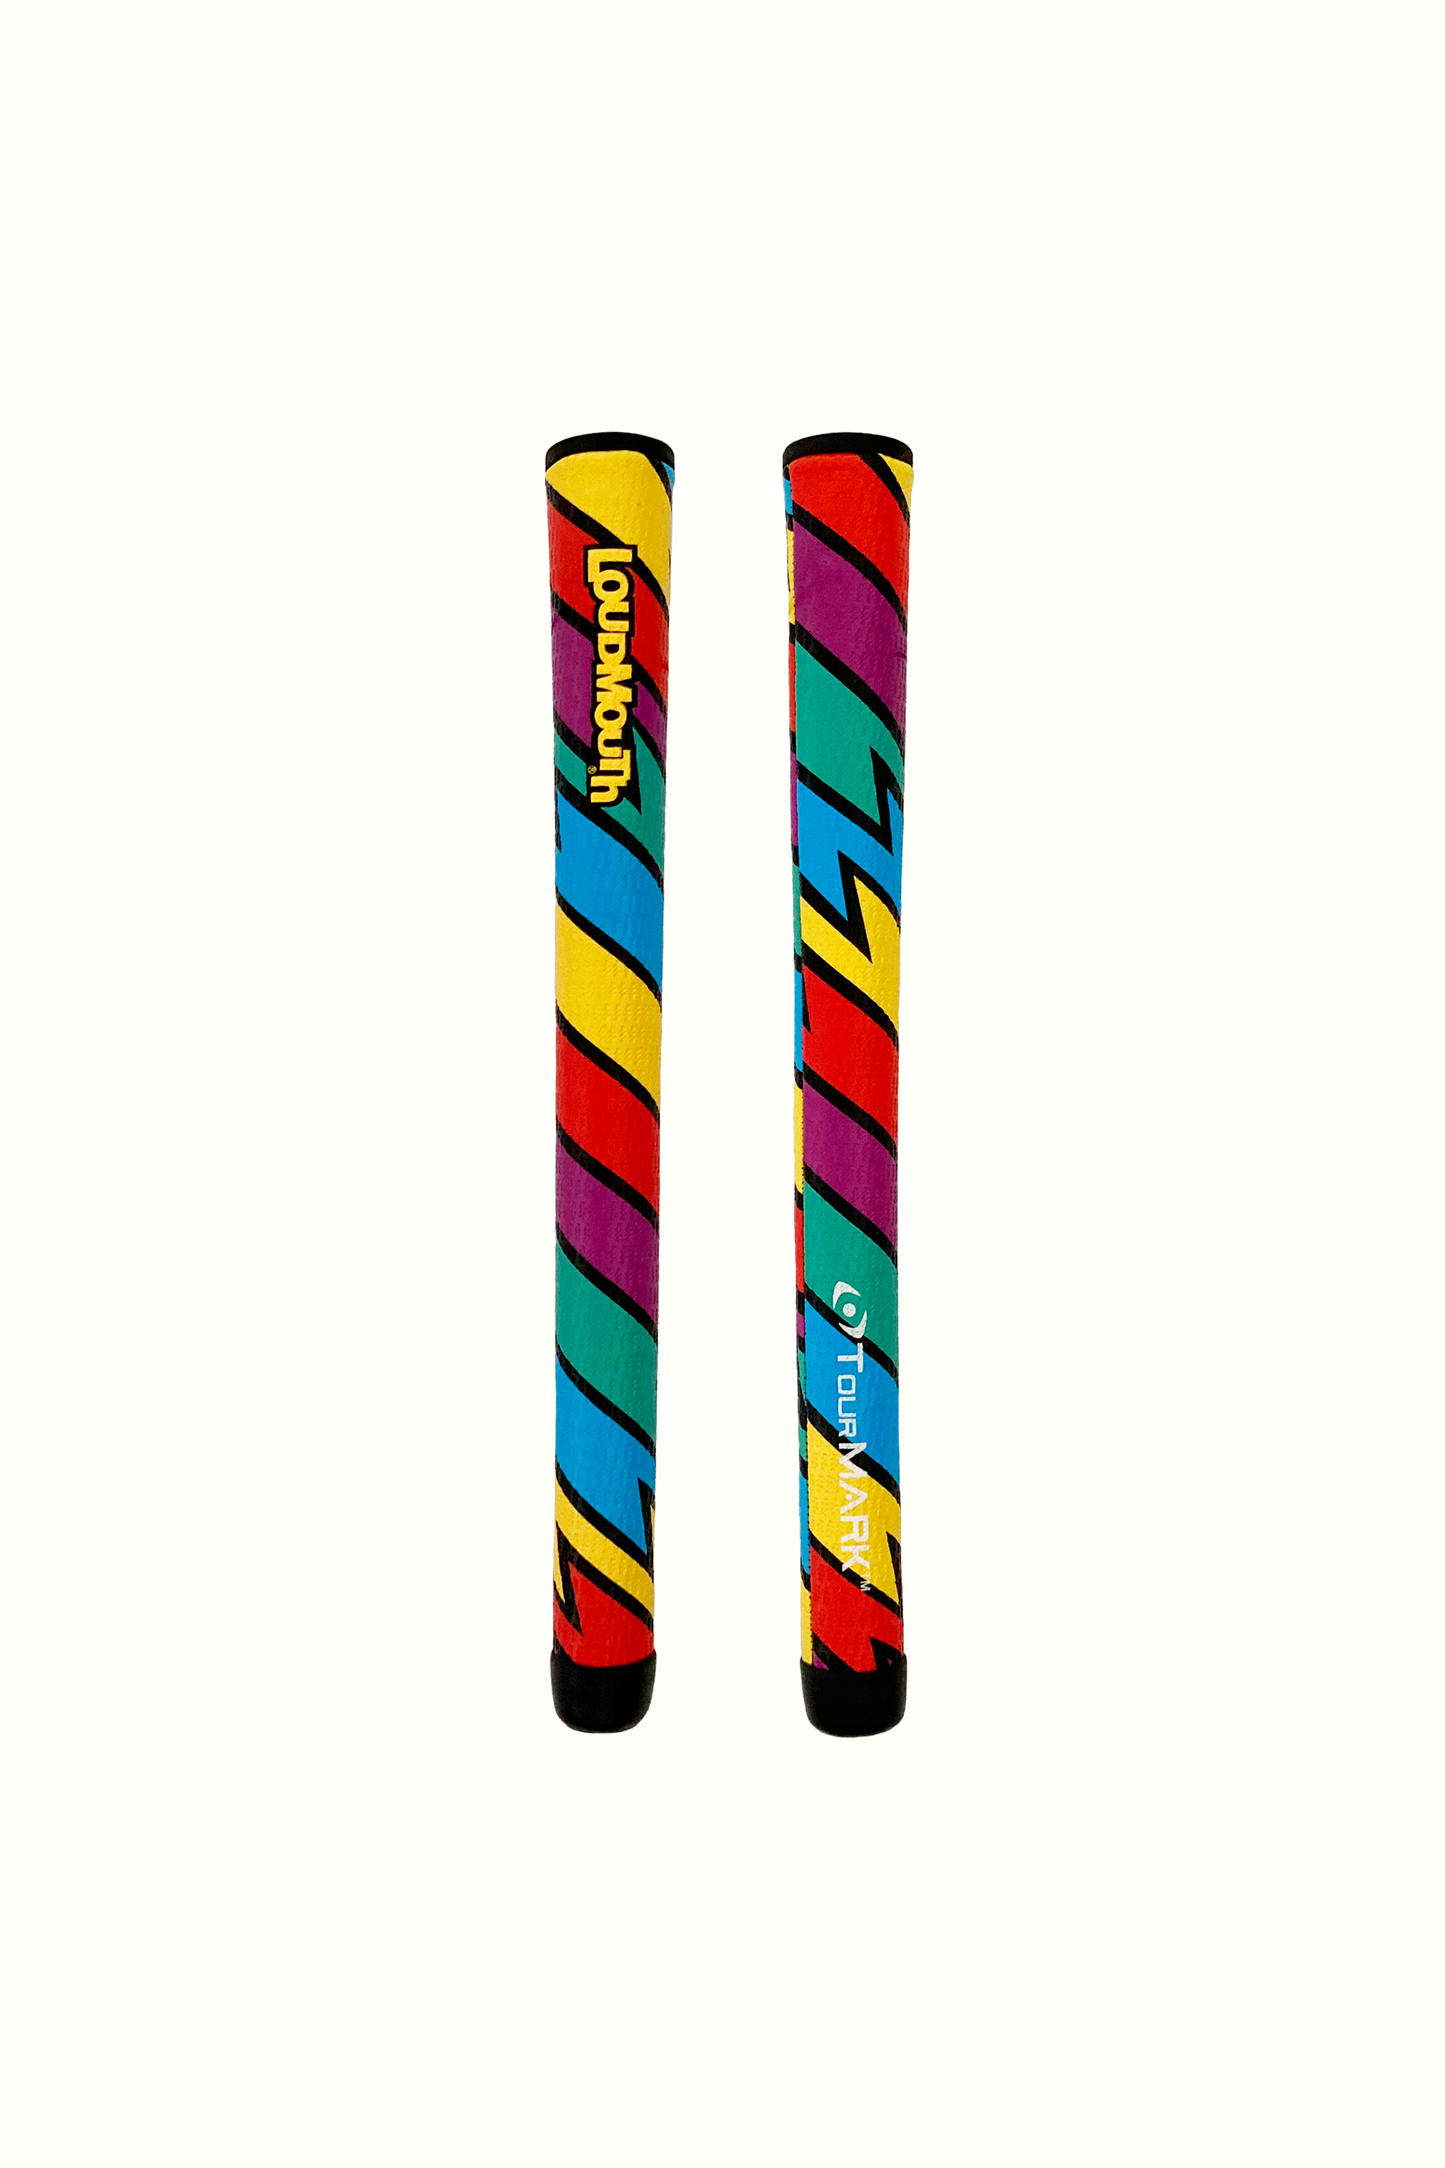 A pair of brightly colored golf grips